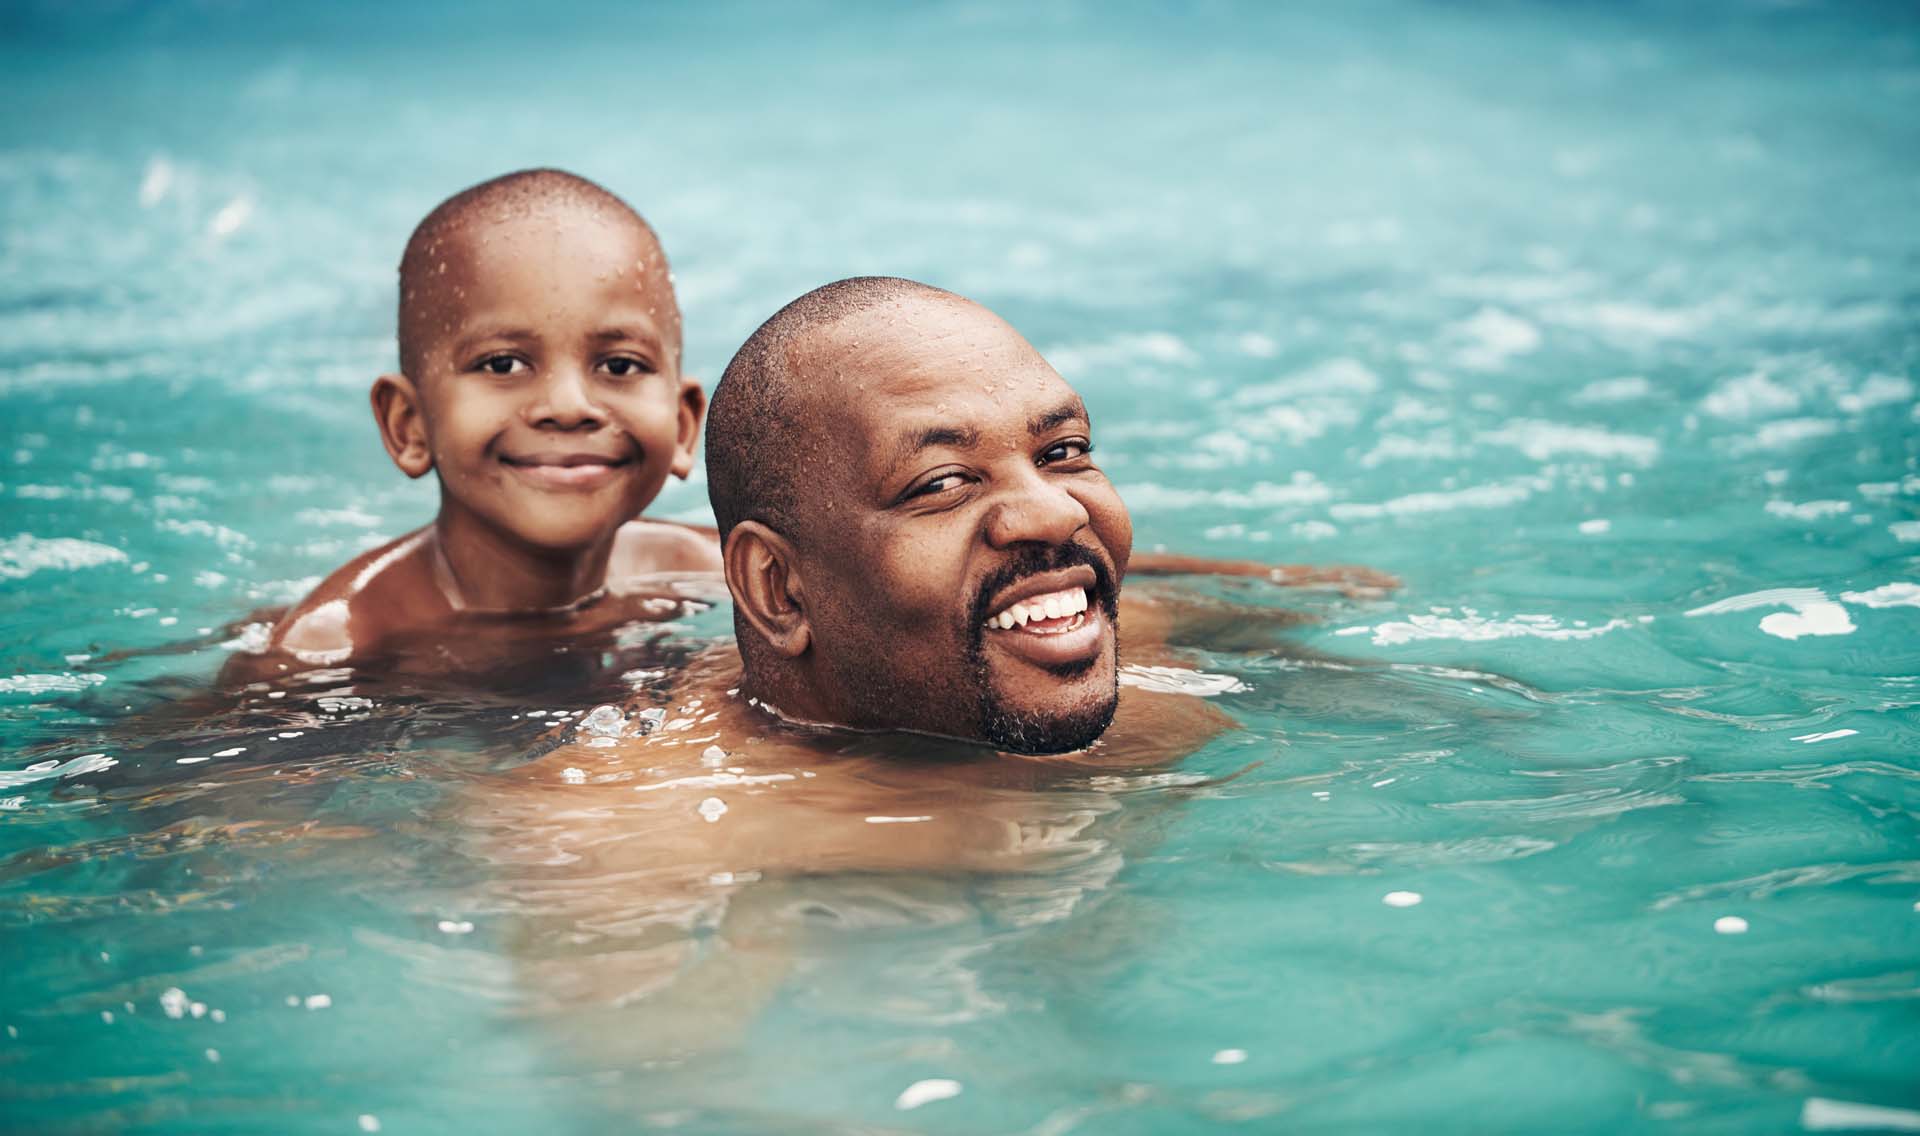 Shot of a happy little boy having fun with his father in a swimming pool